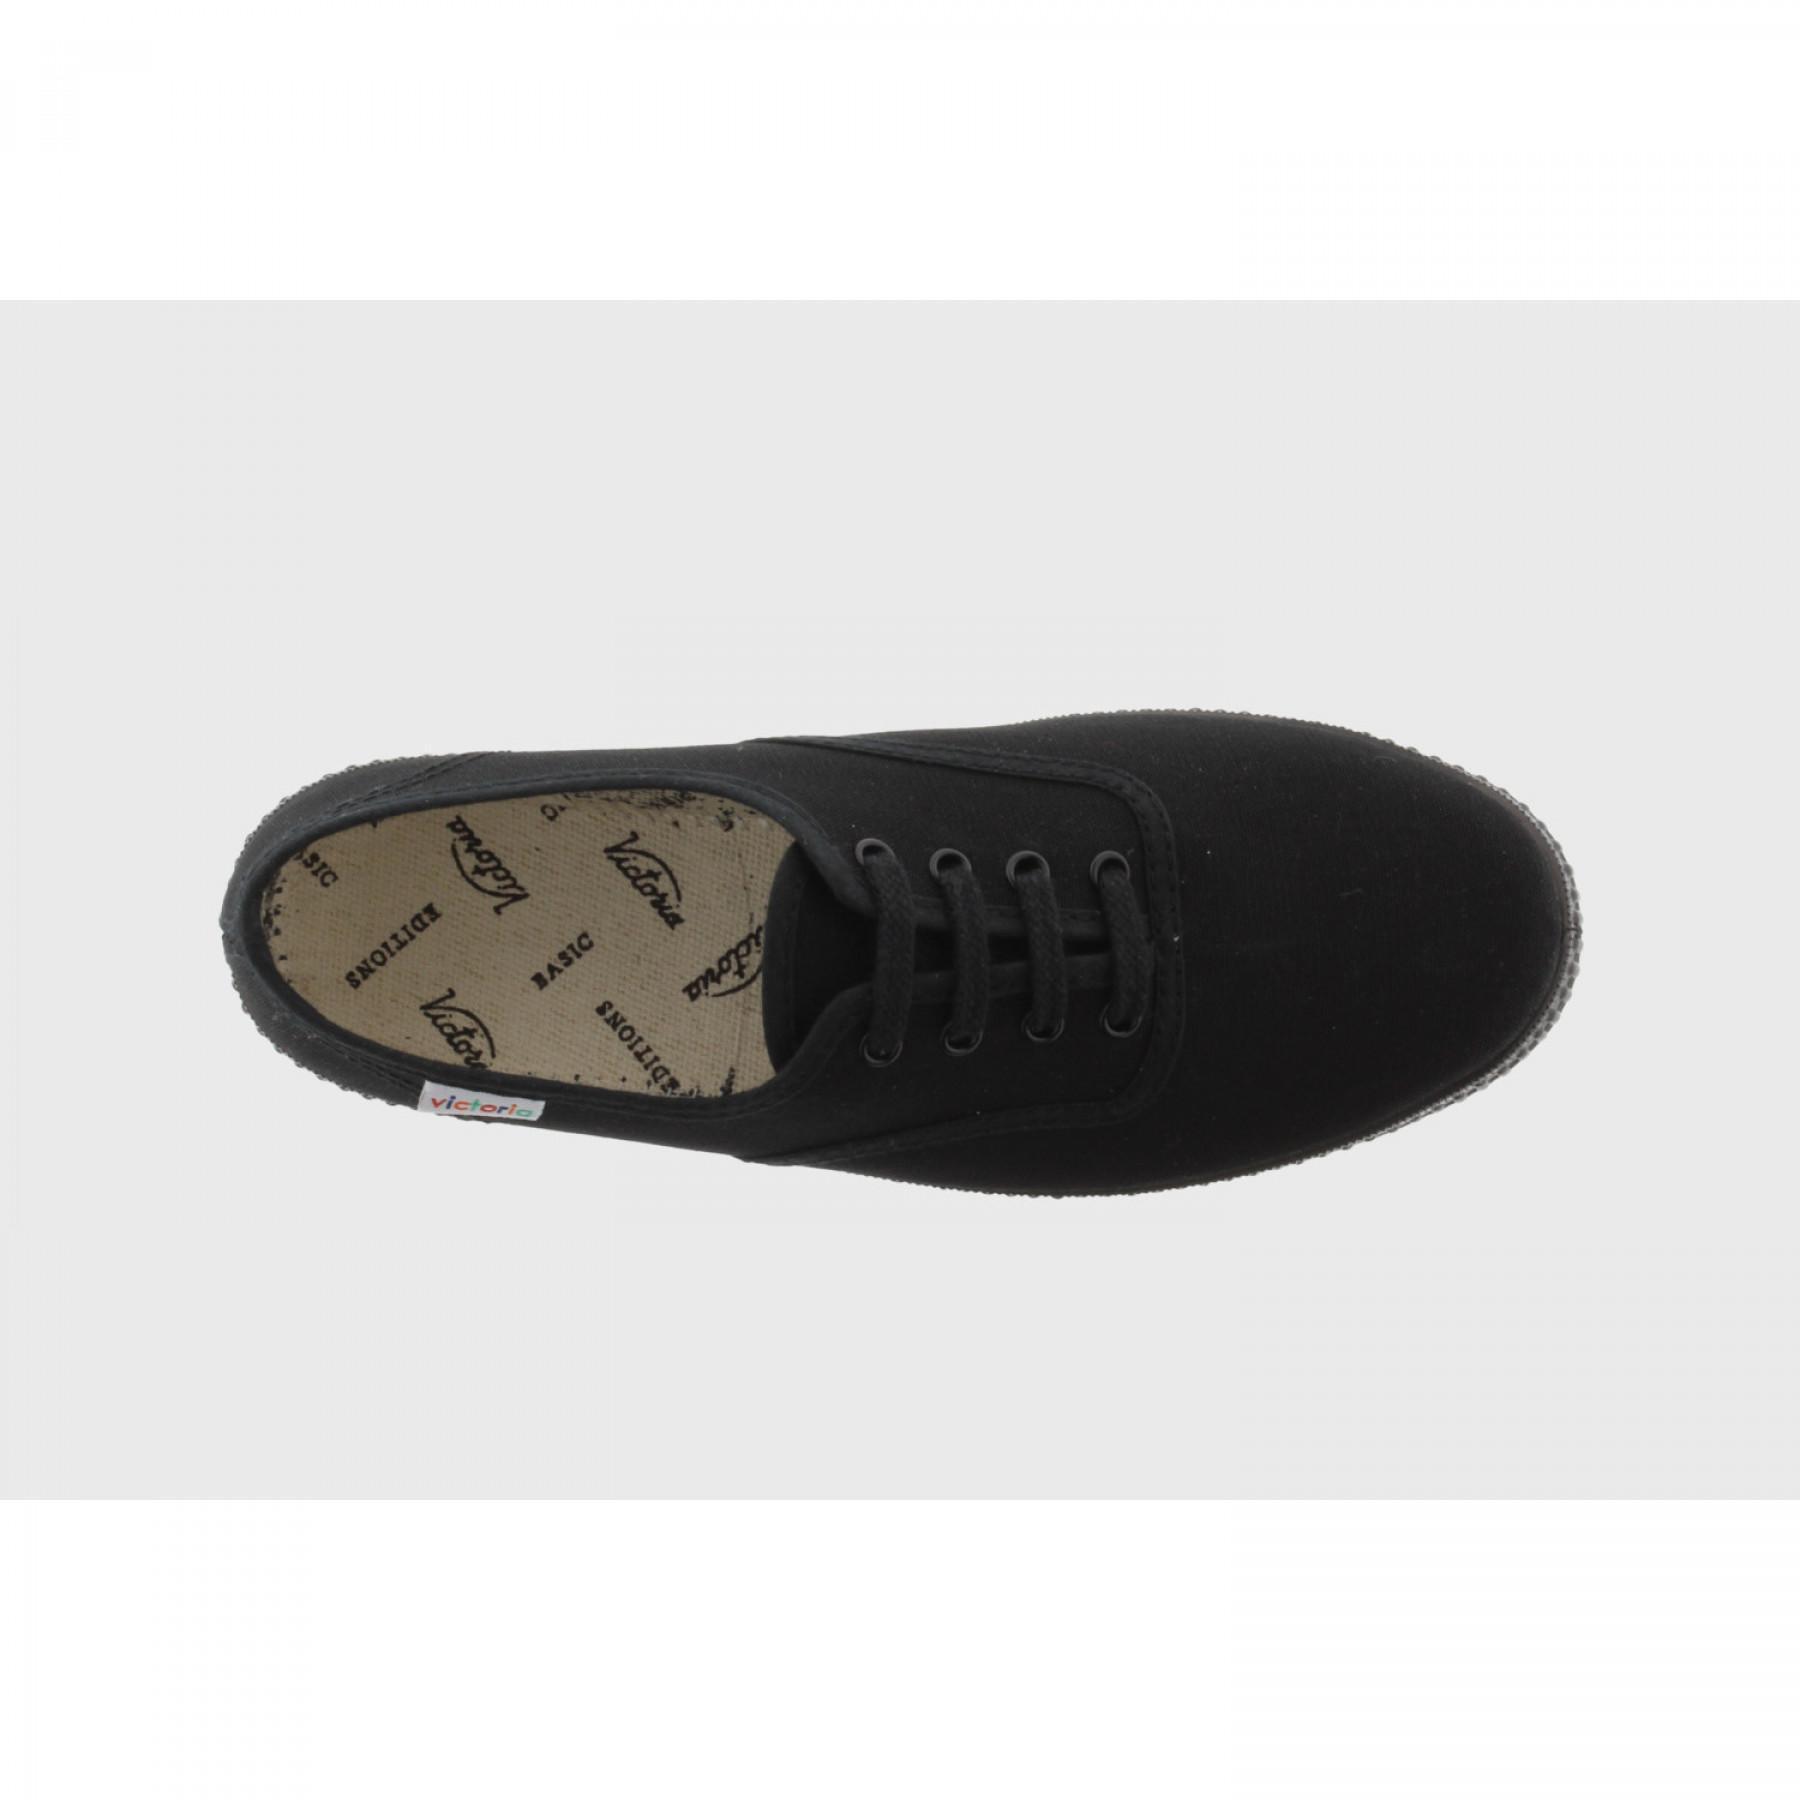 Sneakers Victoria 1915 anglaise total black